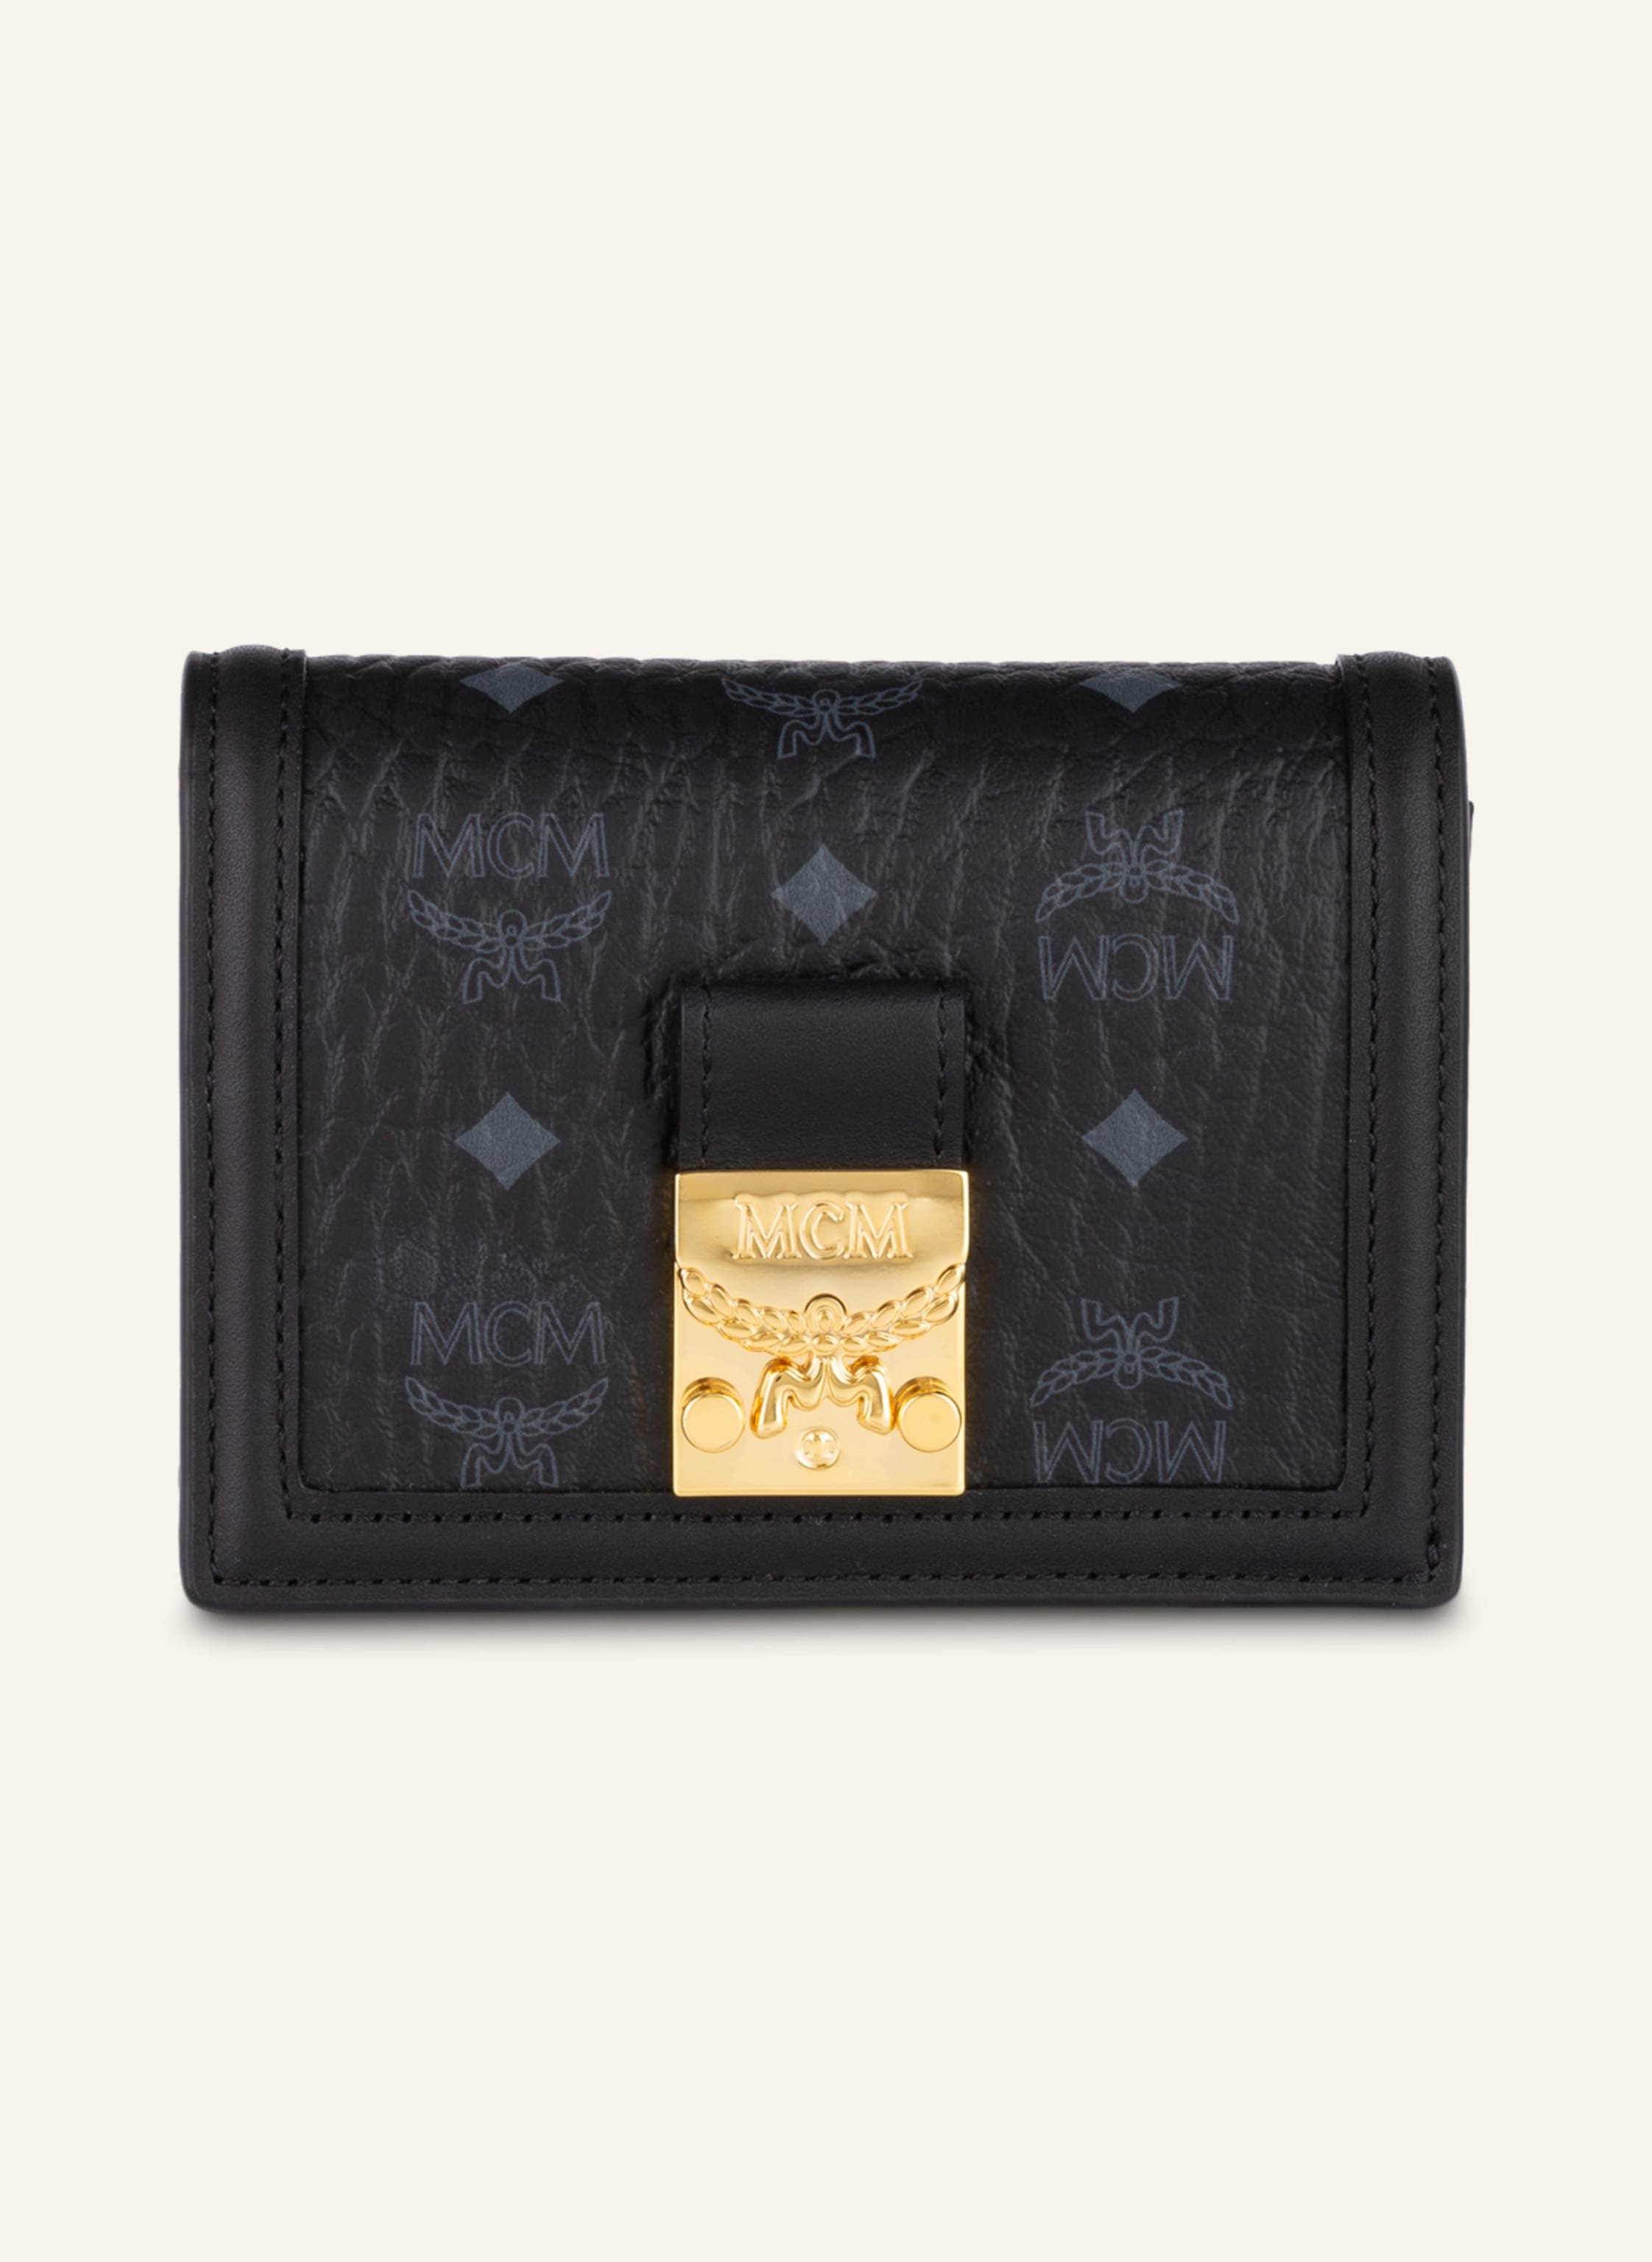 MCM Wallets - Women - 65 products